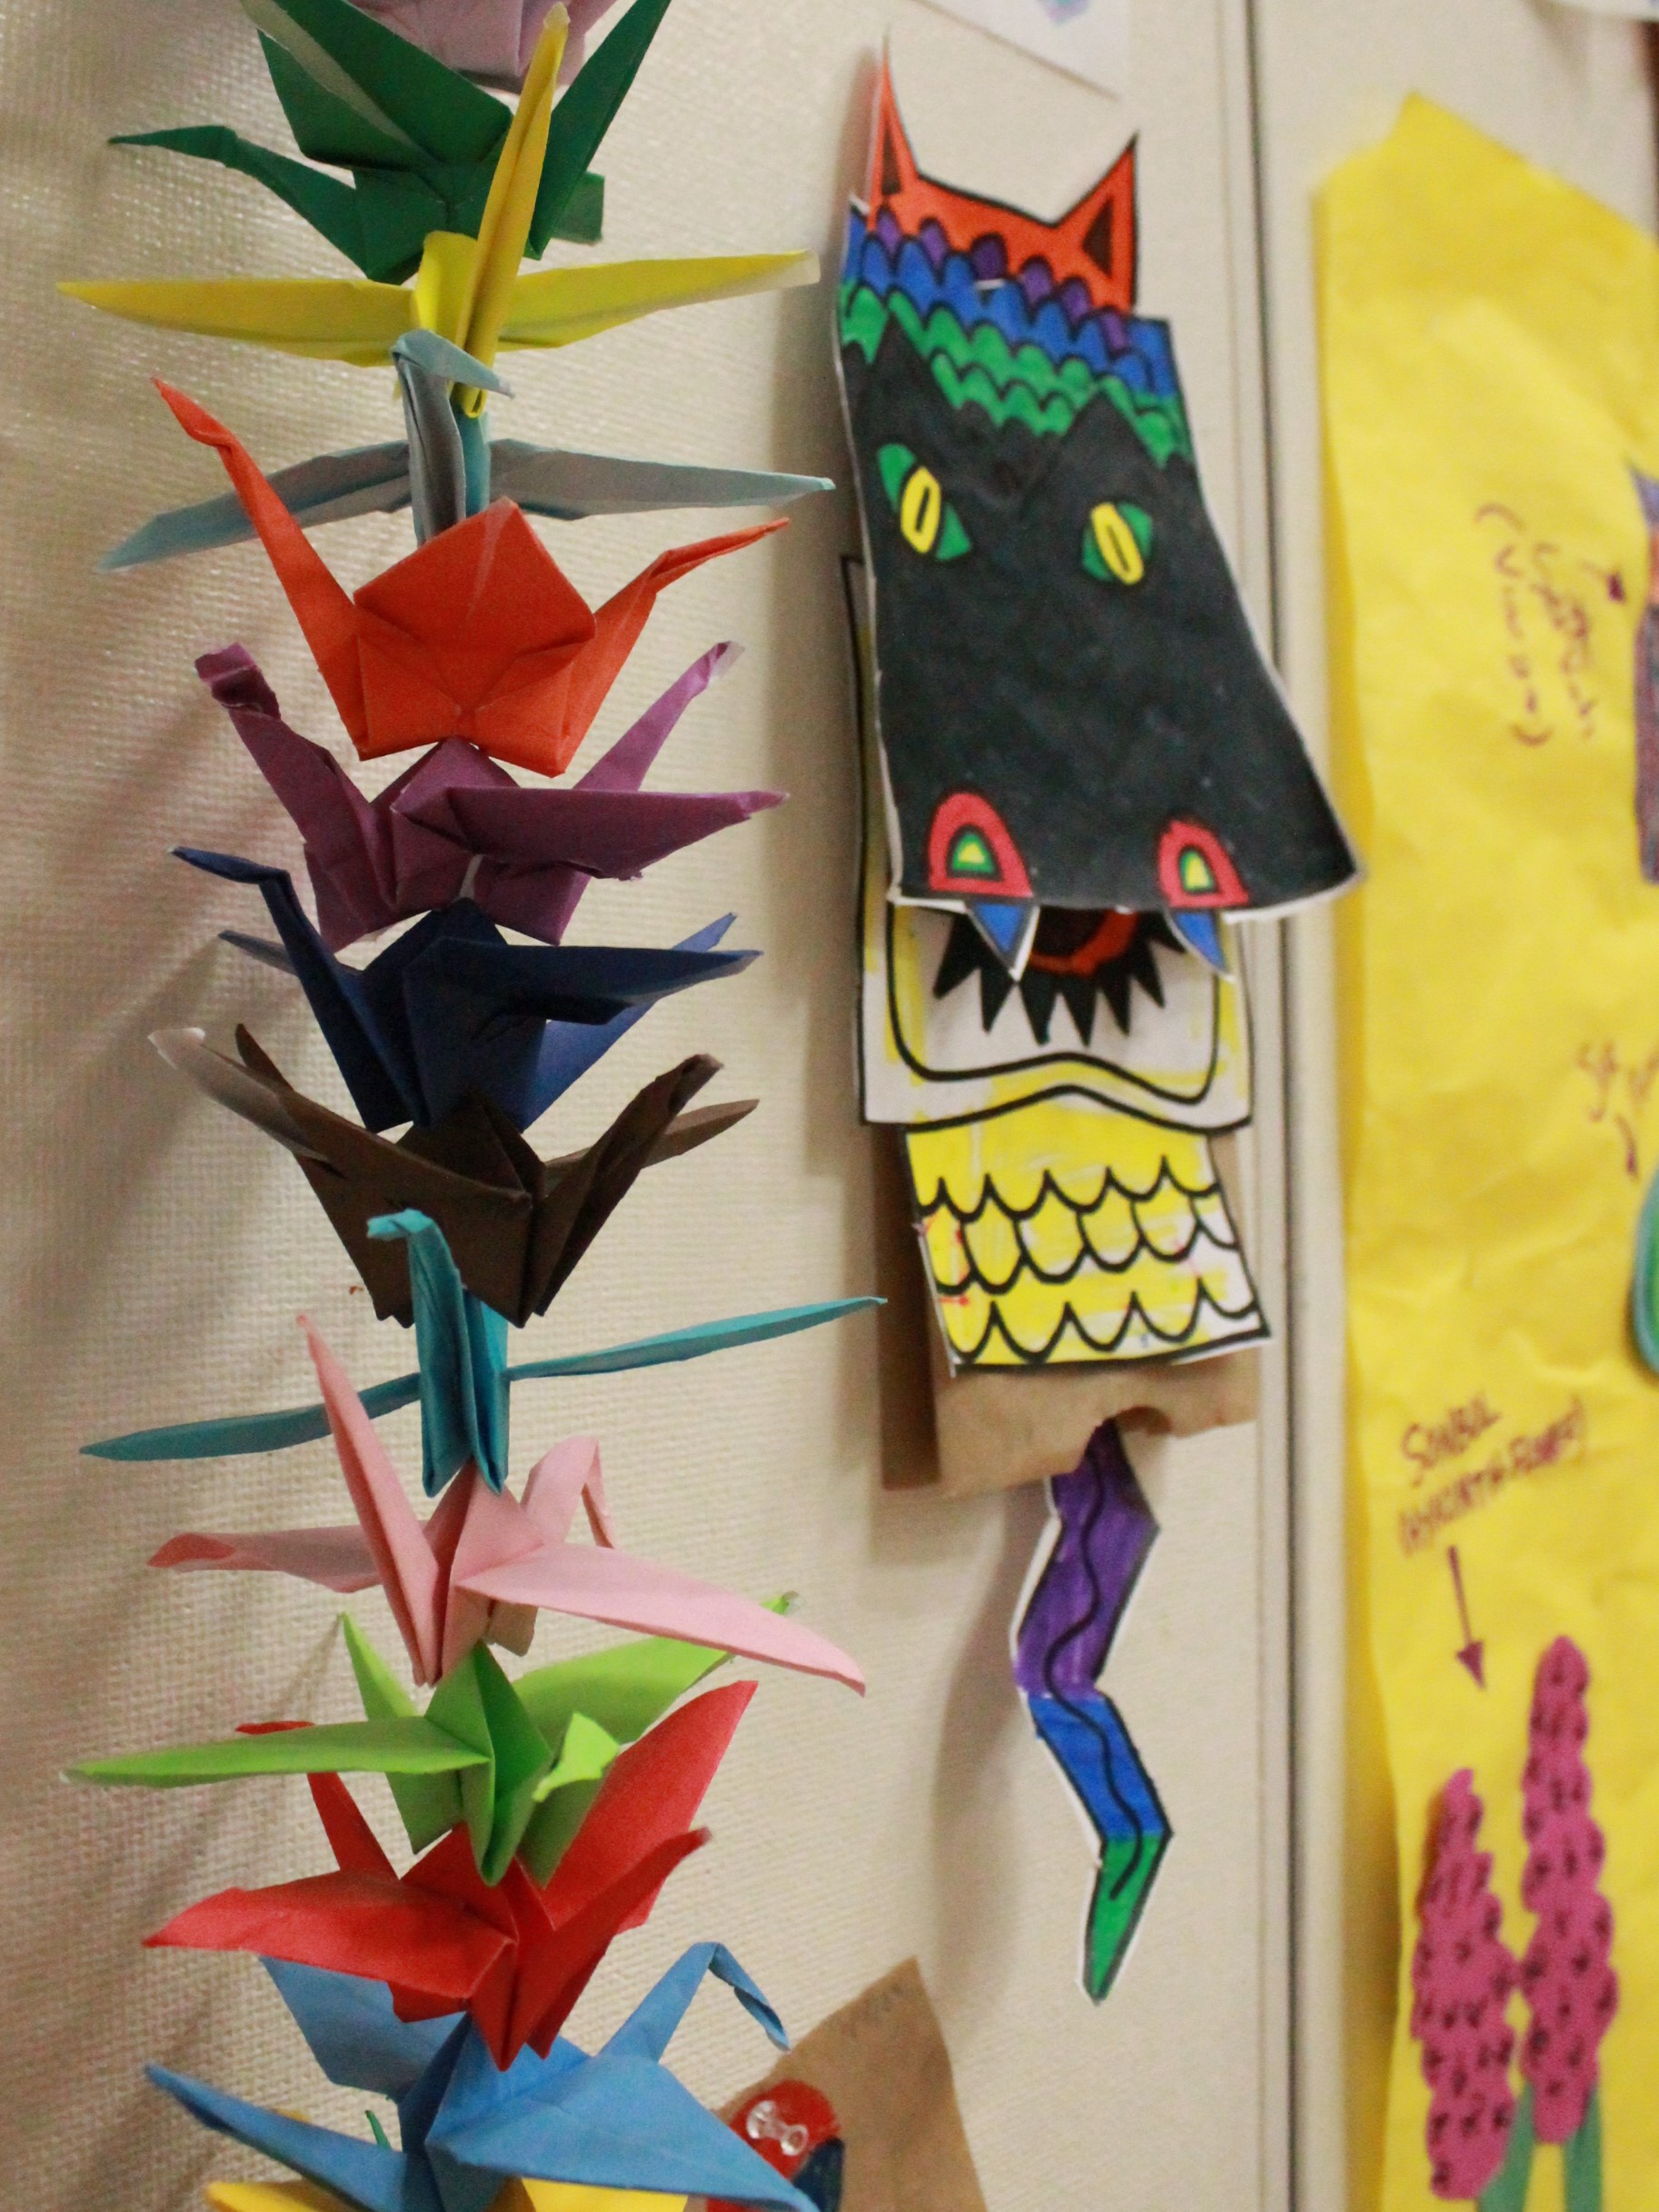 Colorful paper crafts hanging on a wall at an Asian Heritage festival